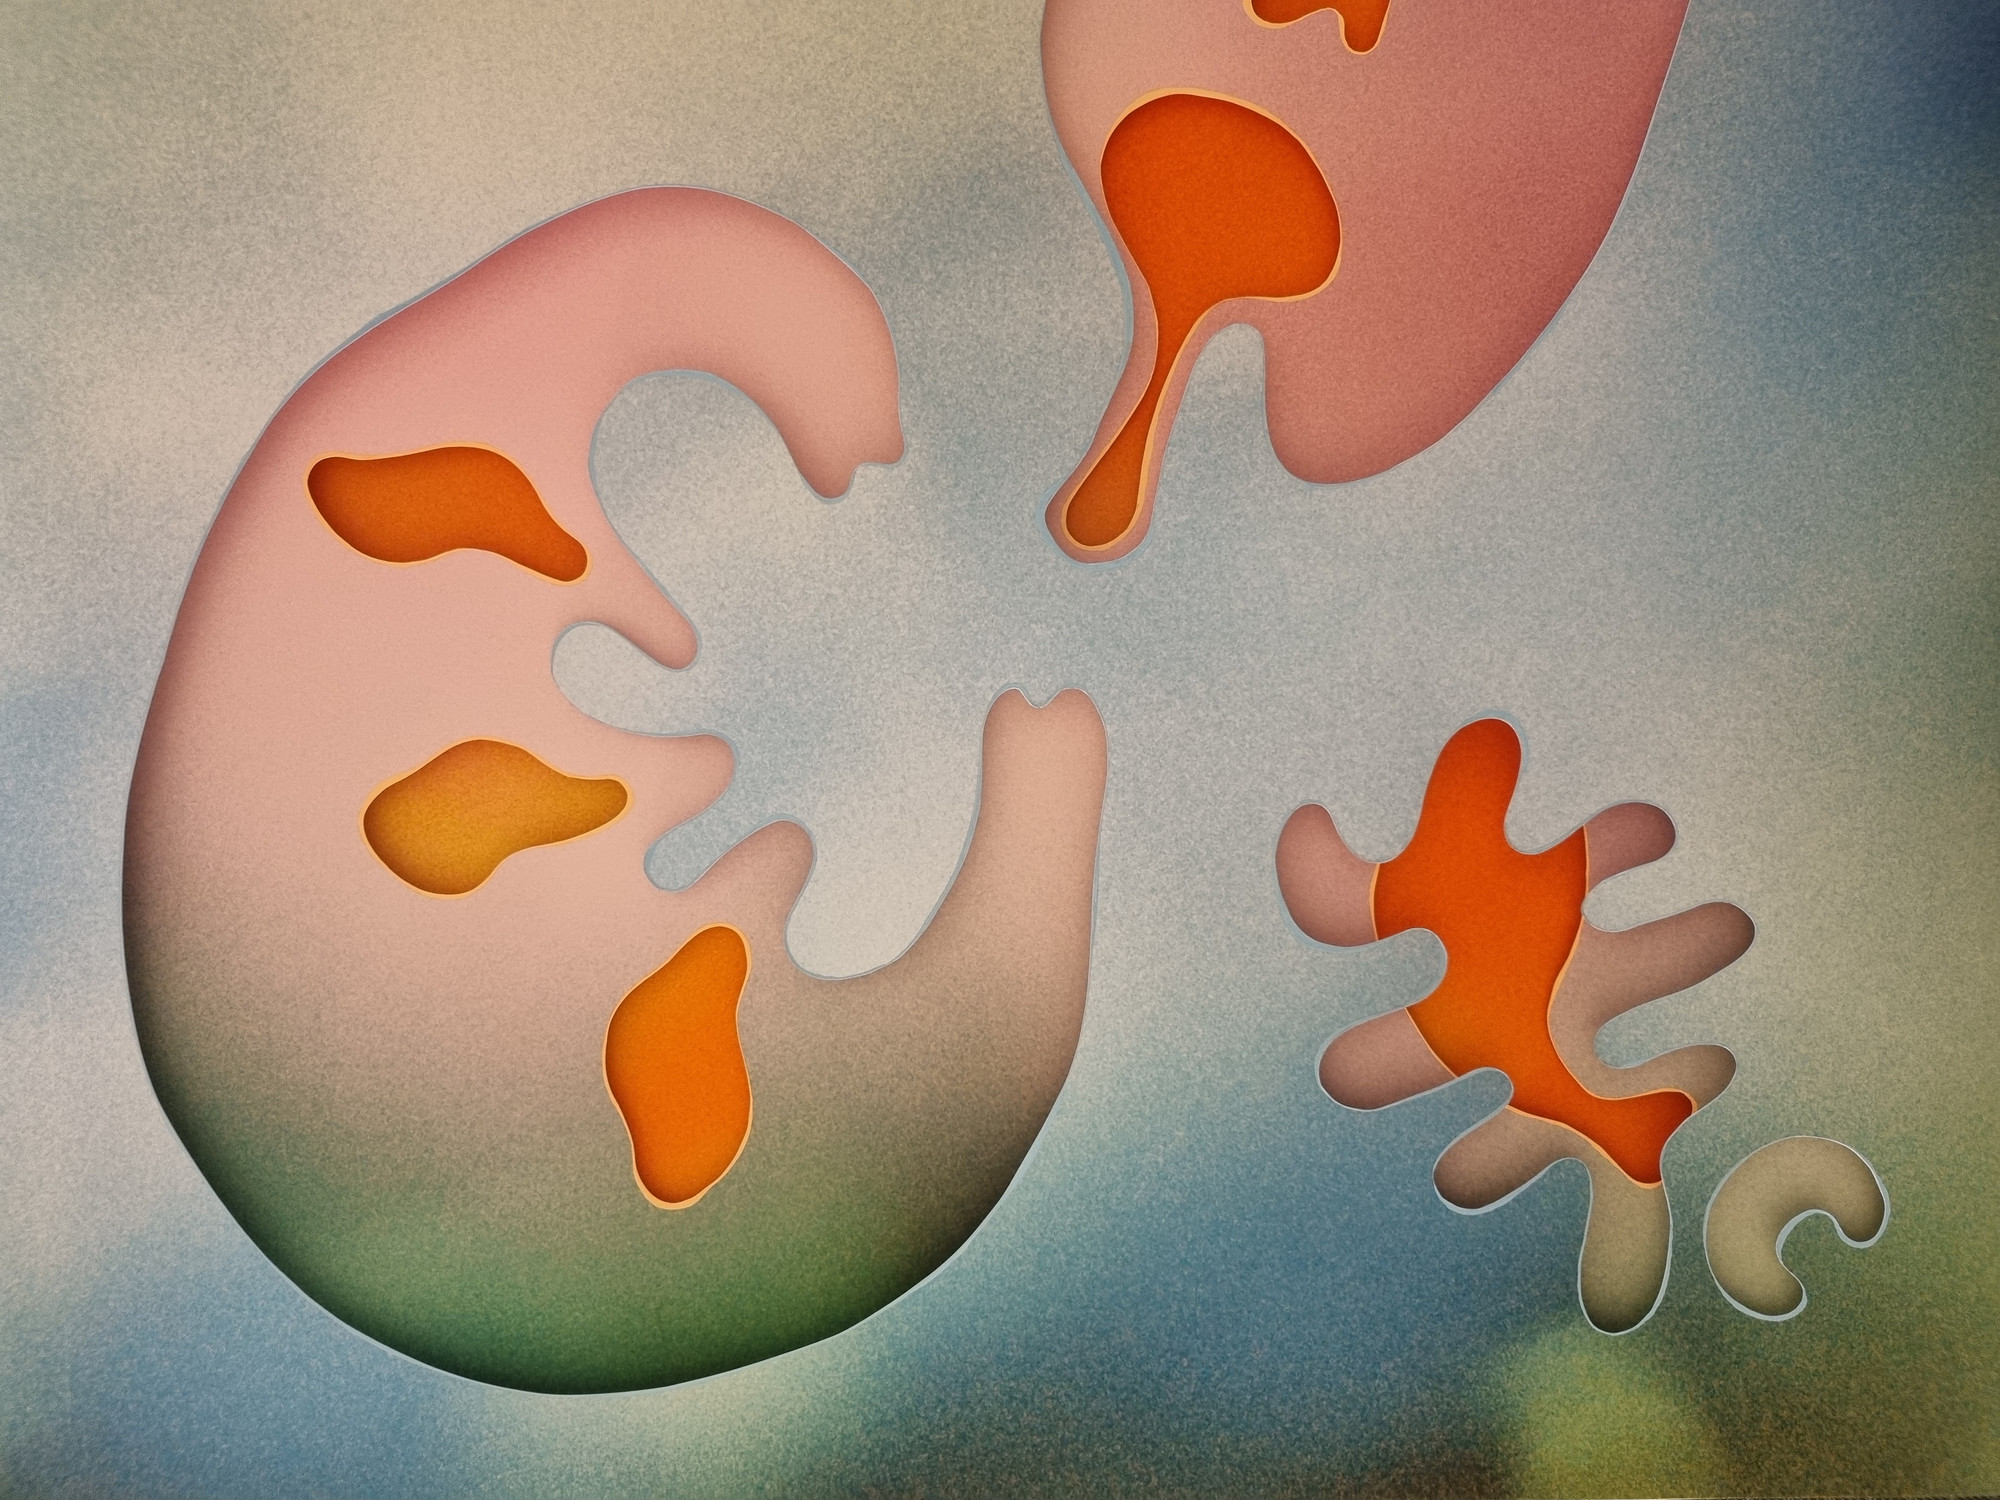 Detail from art work by Sofie Brønner. Pink, orange and green abstract forms on a green and blue background.